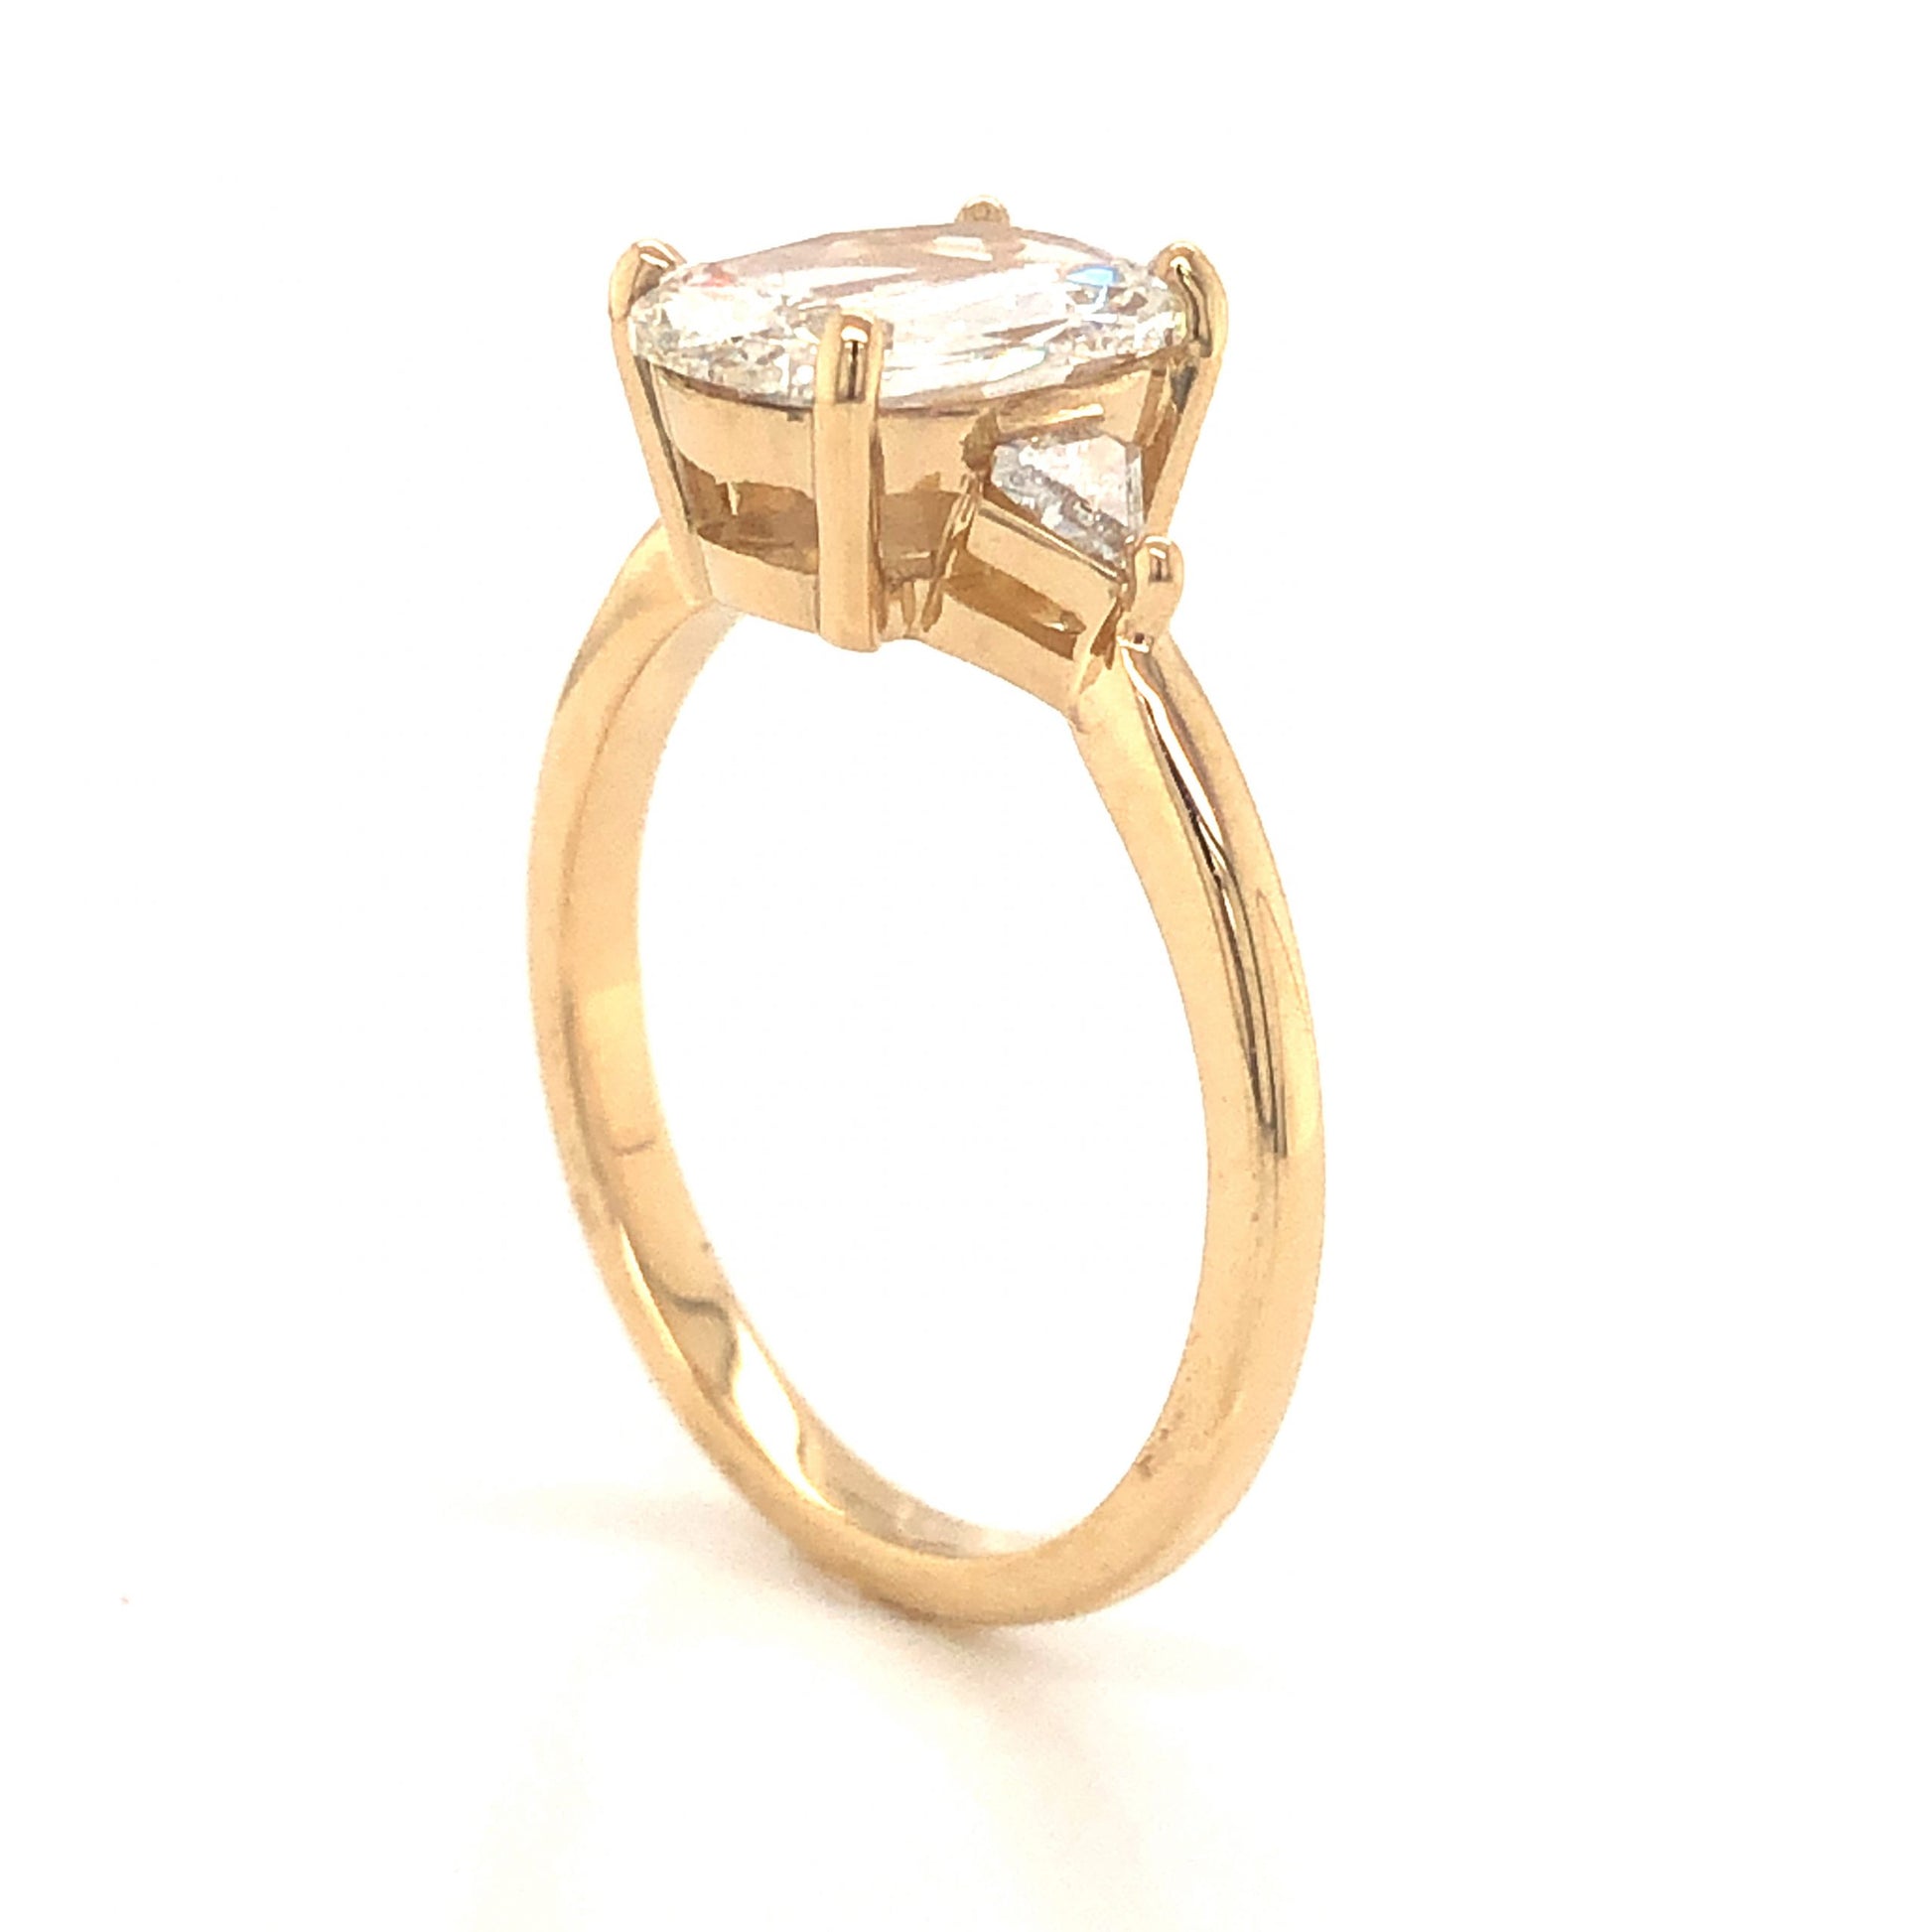 1.50 Old Mine Cushion Cut Diamond Engagement Ring in 14k Yellow Gold